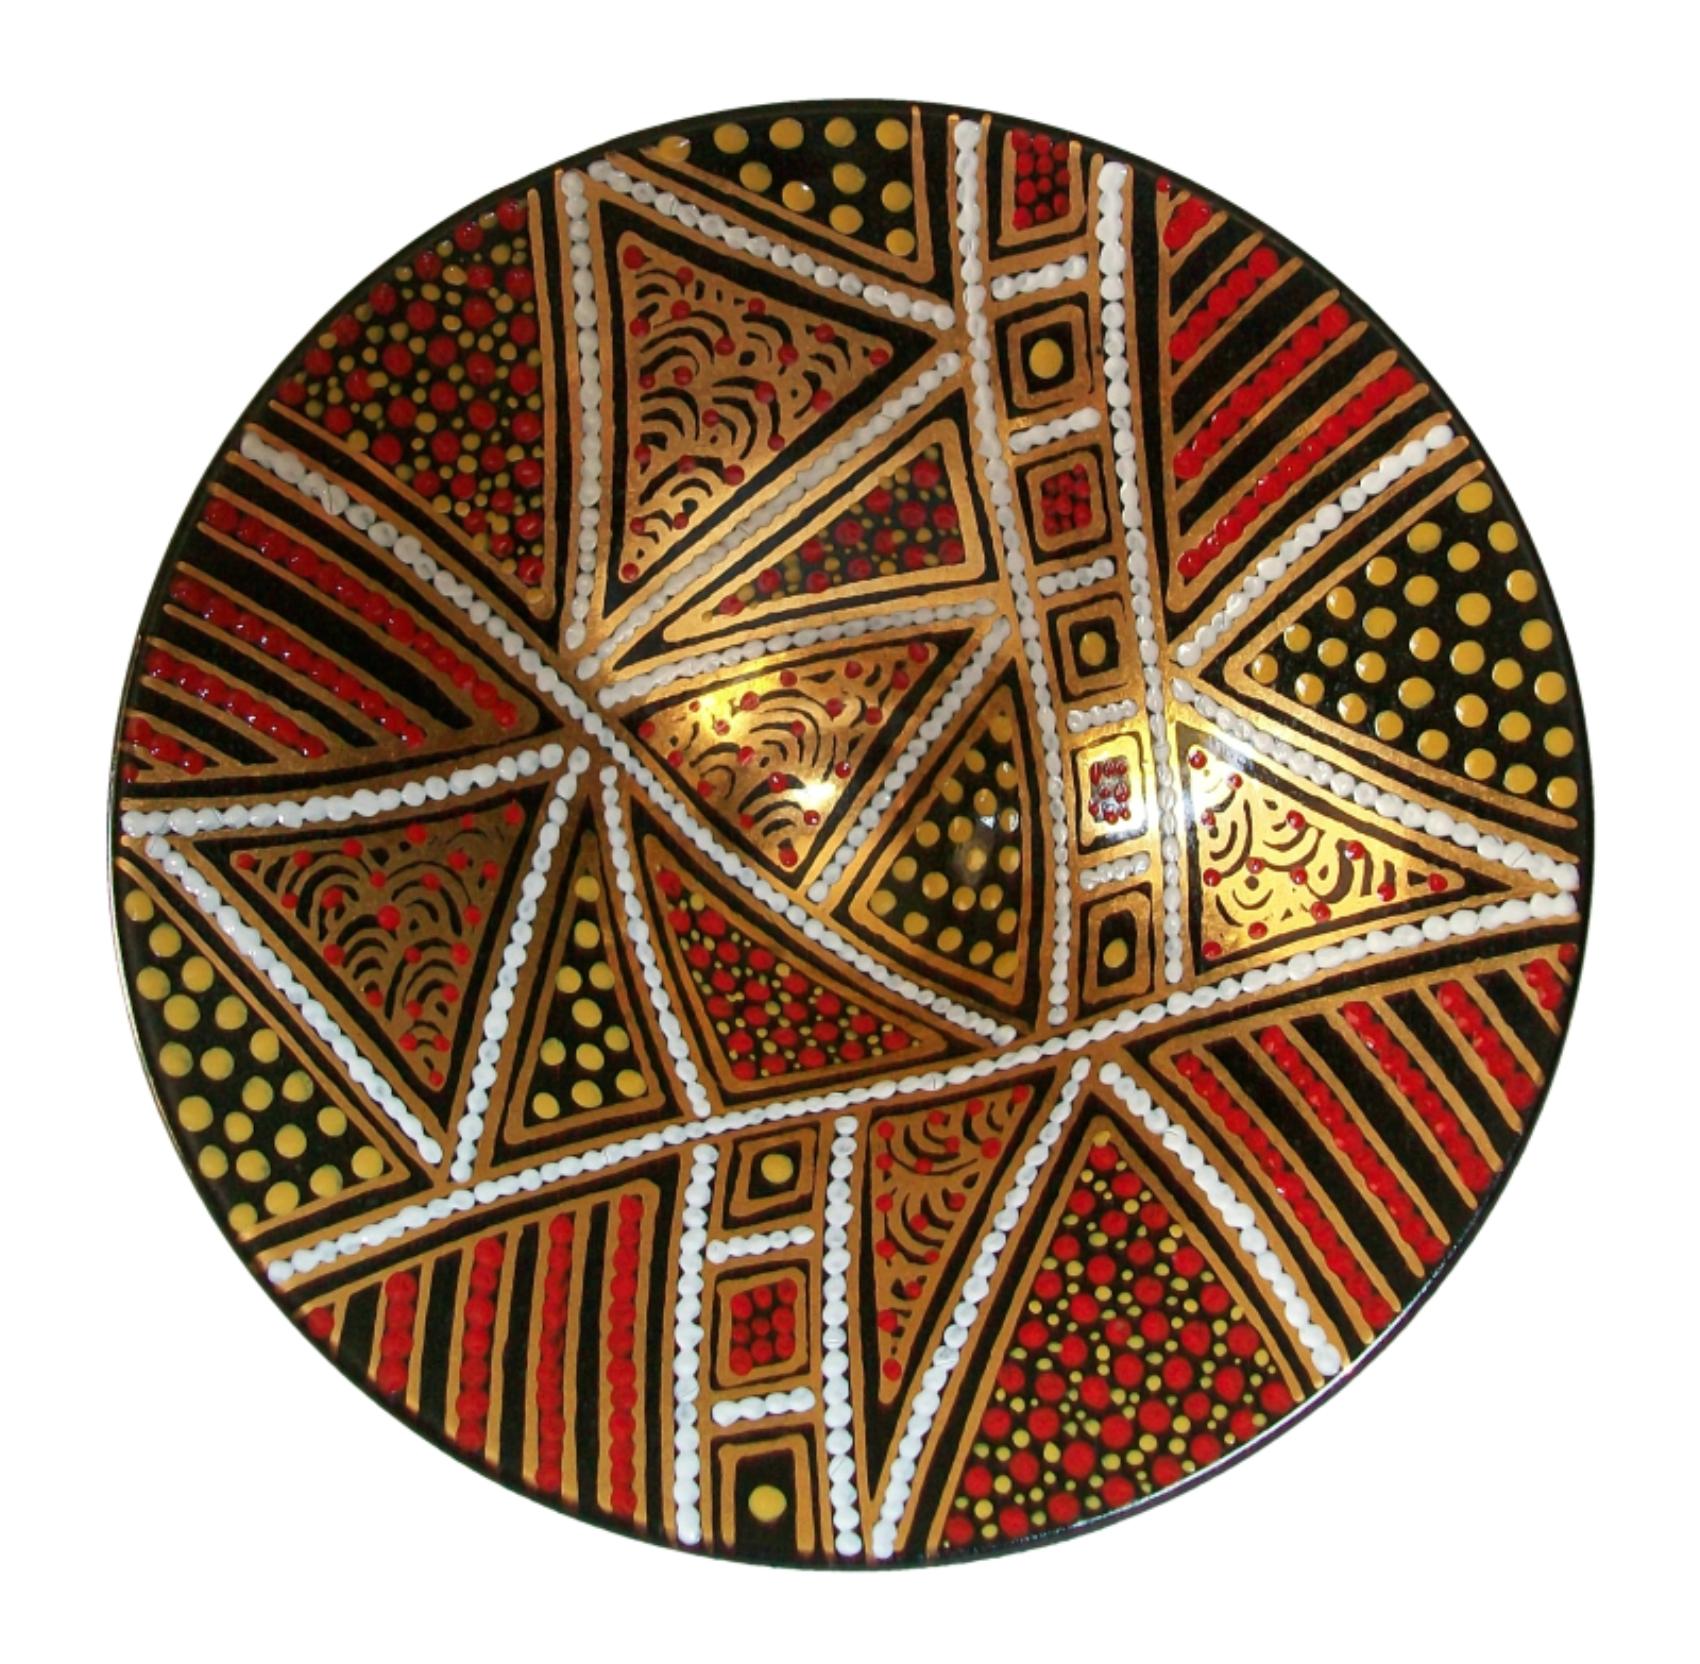 Aboriginal 'dot' pattern studio pottery bowl with gilded highlights - wheel thrown conical shape - hand painted design with mirror black glaze to the outer sides and background - signed (unknown/unidentified artist/potter) - Australia - late 20th